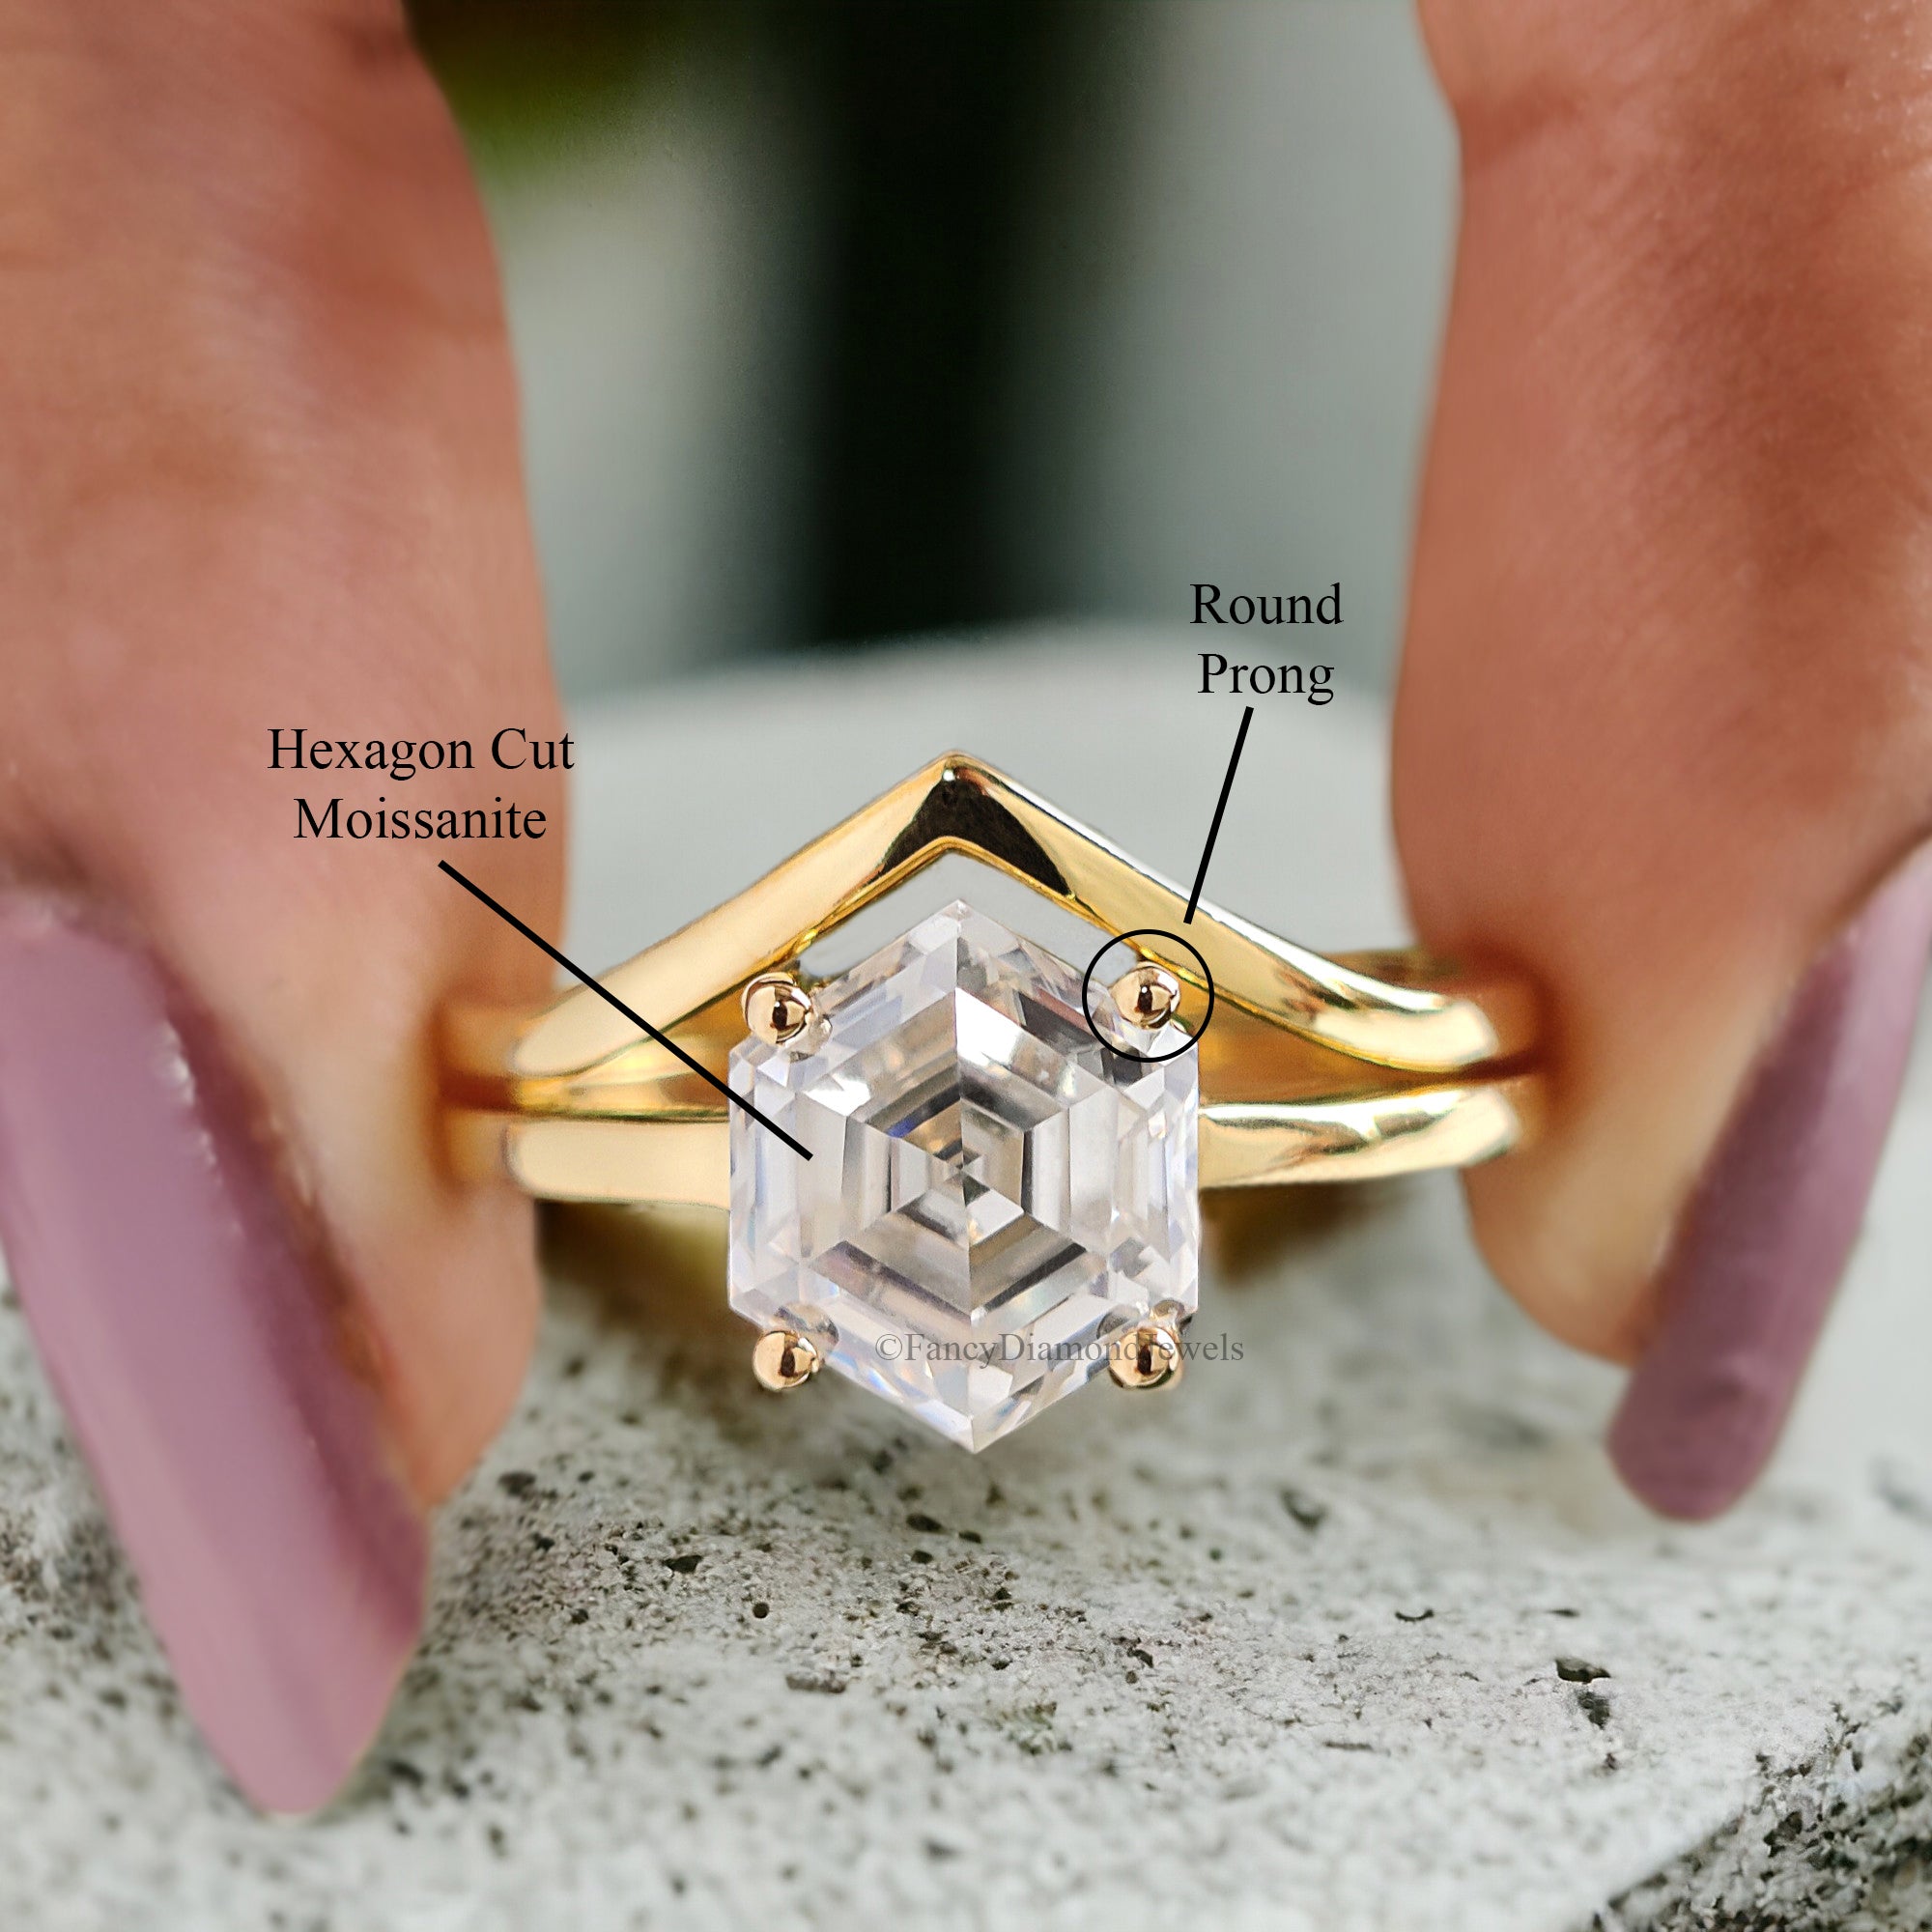 Hexagon Moissanite Bridal Ring Colorless Moissanite Wedding Ring Solid Gold Anniversary Band Solitaire Moissanite Engagement Ring Set FD165